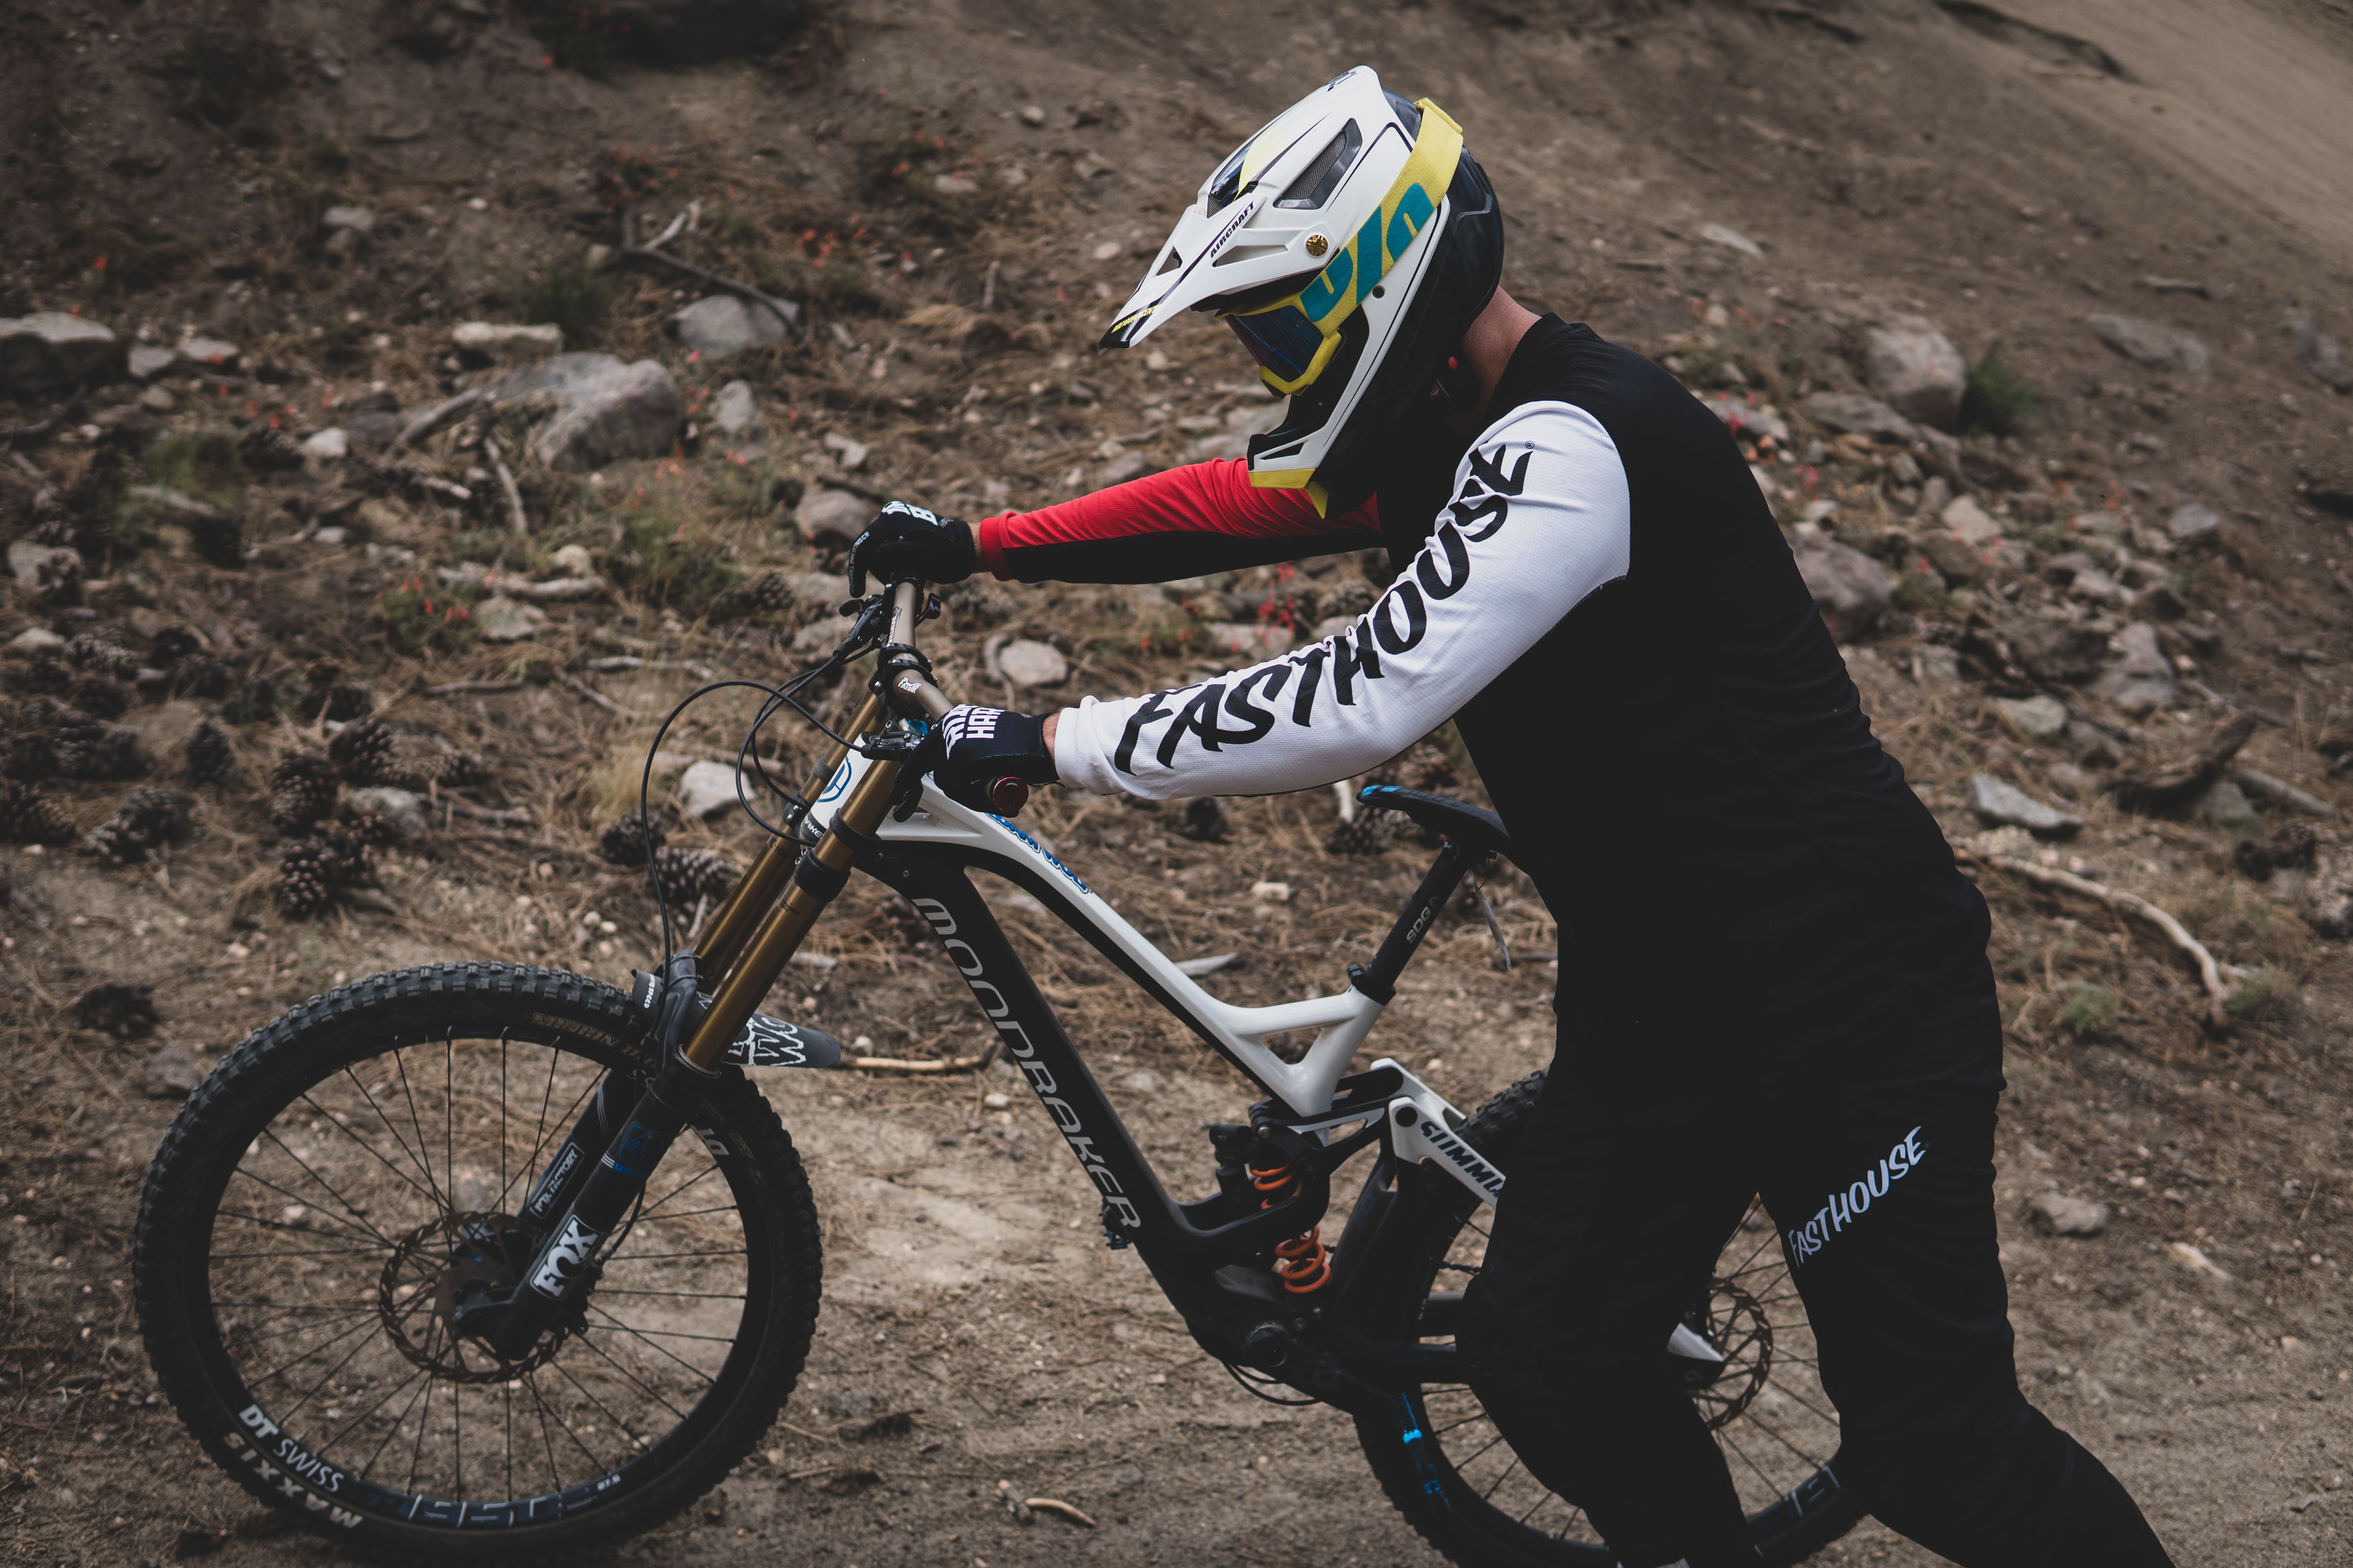 Review: Fasthouse Fastline DH Kit